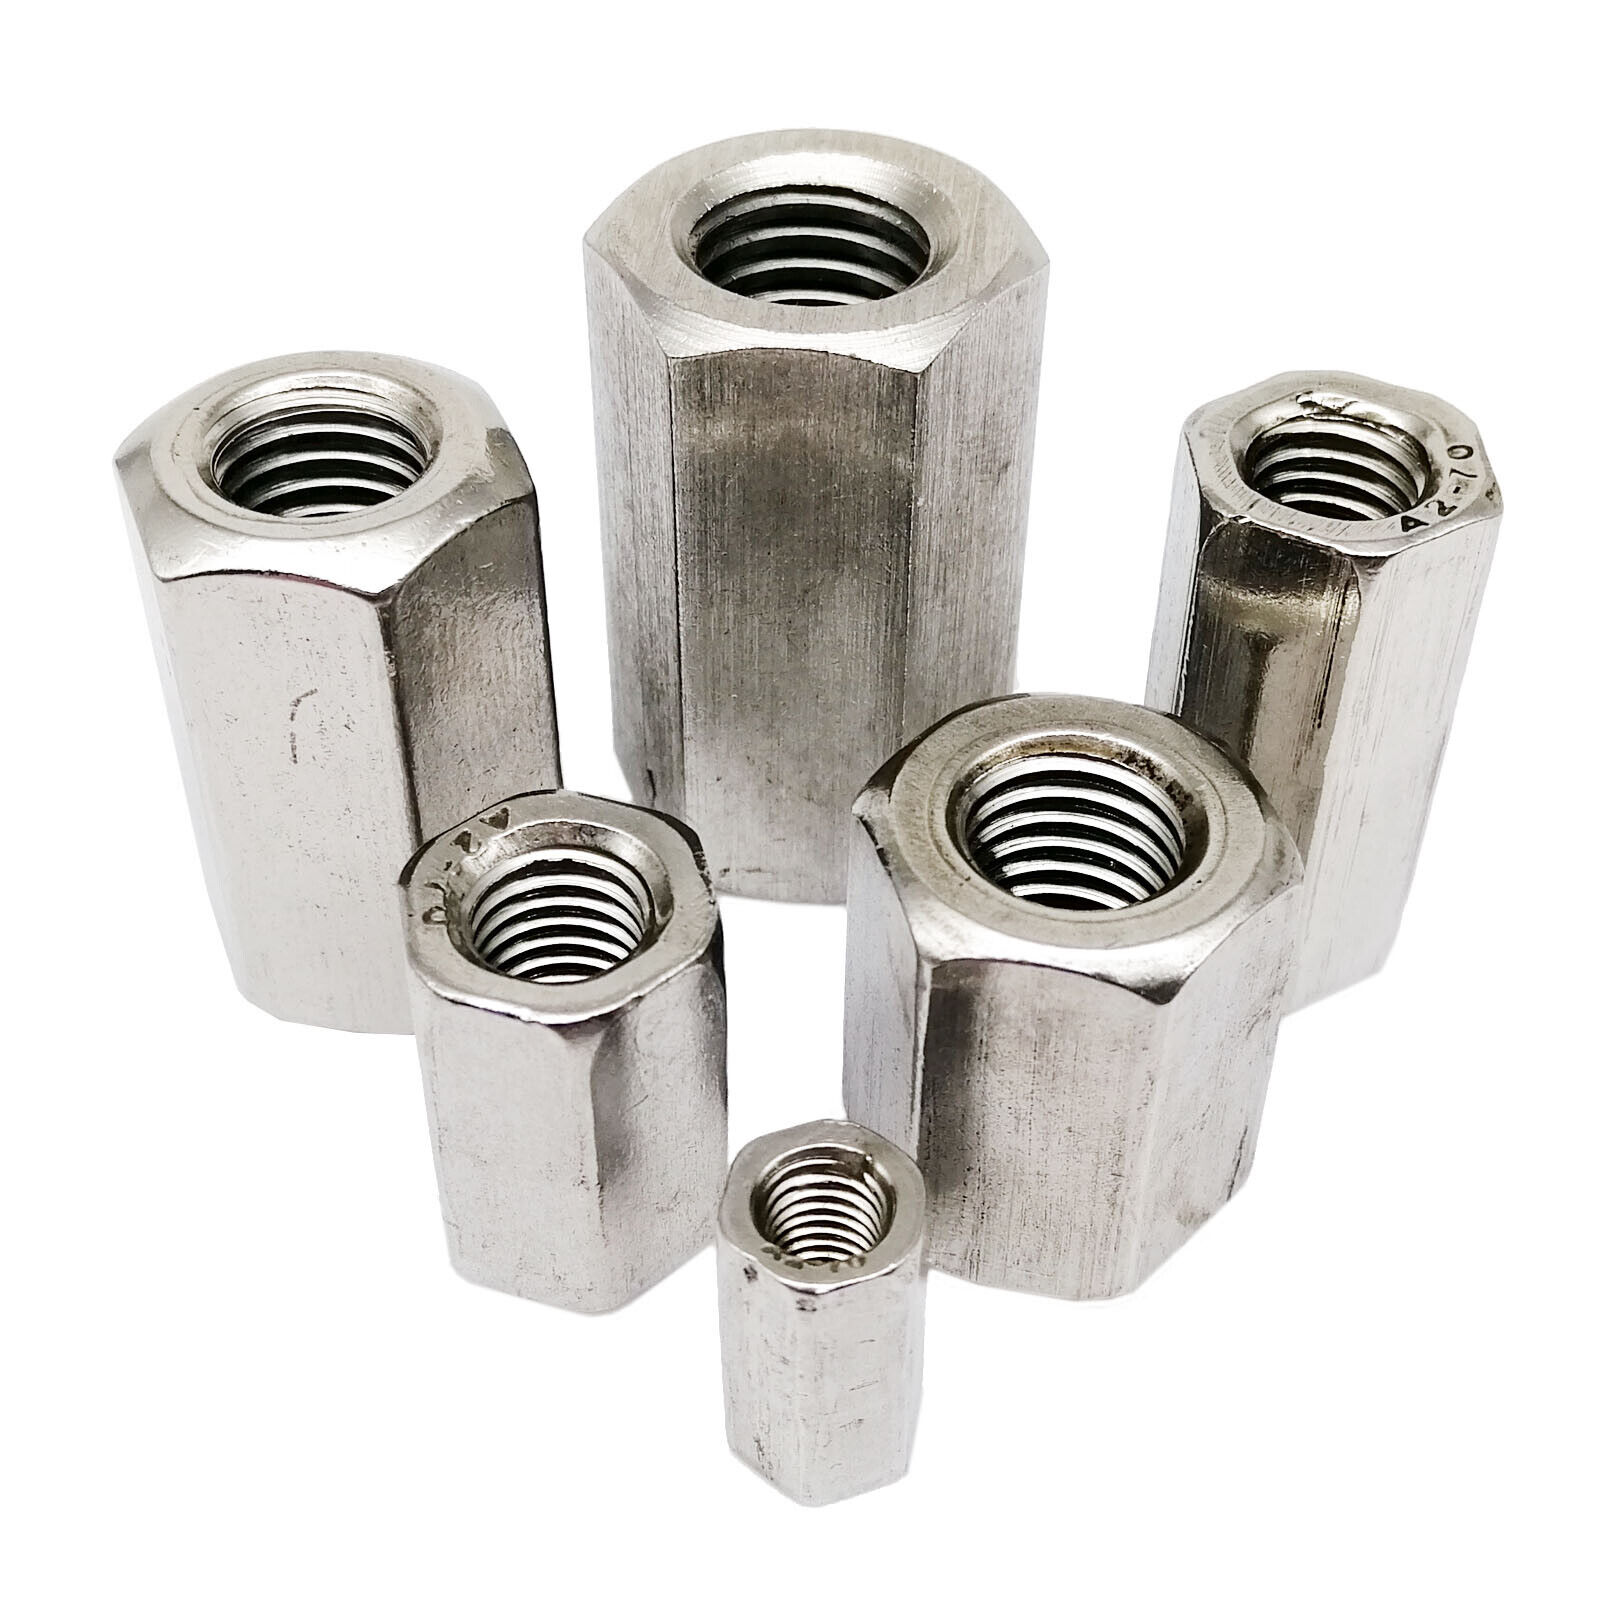 M5-M12 304 Stainless Steel Hexagon Hex Long Connector Joint Tubular Coupling Nut